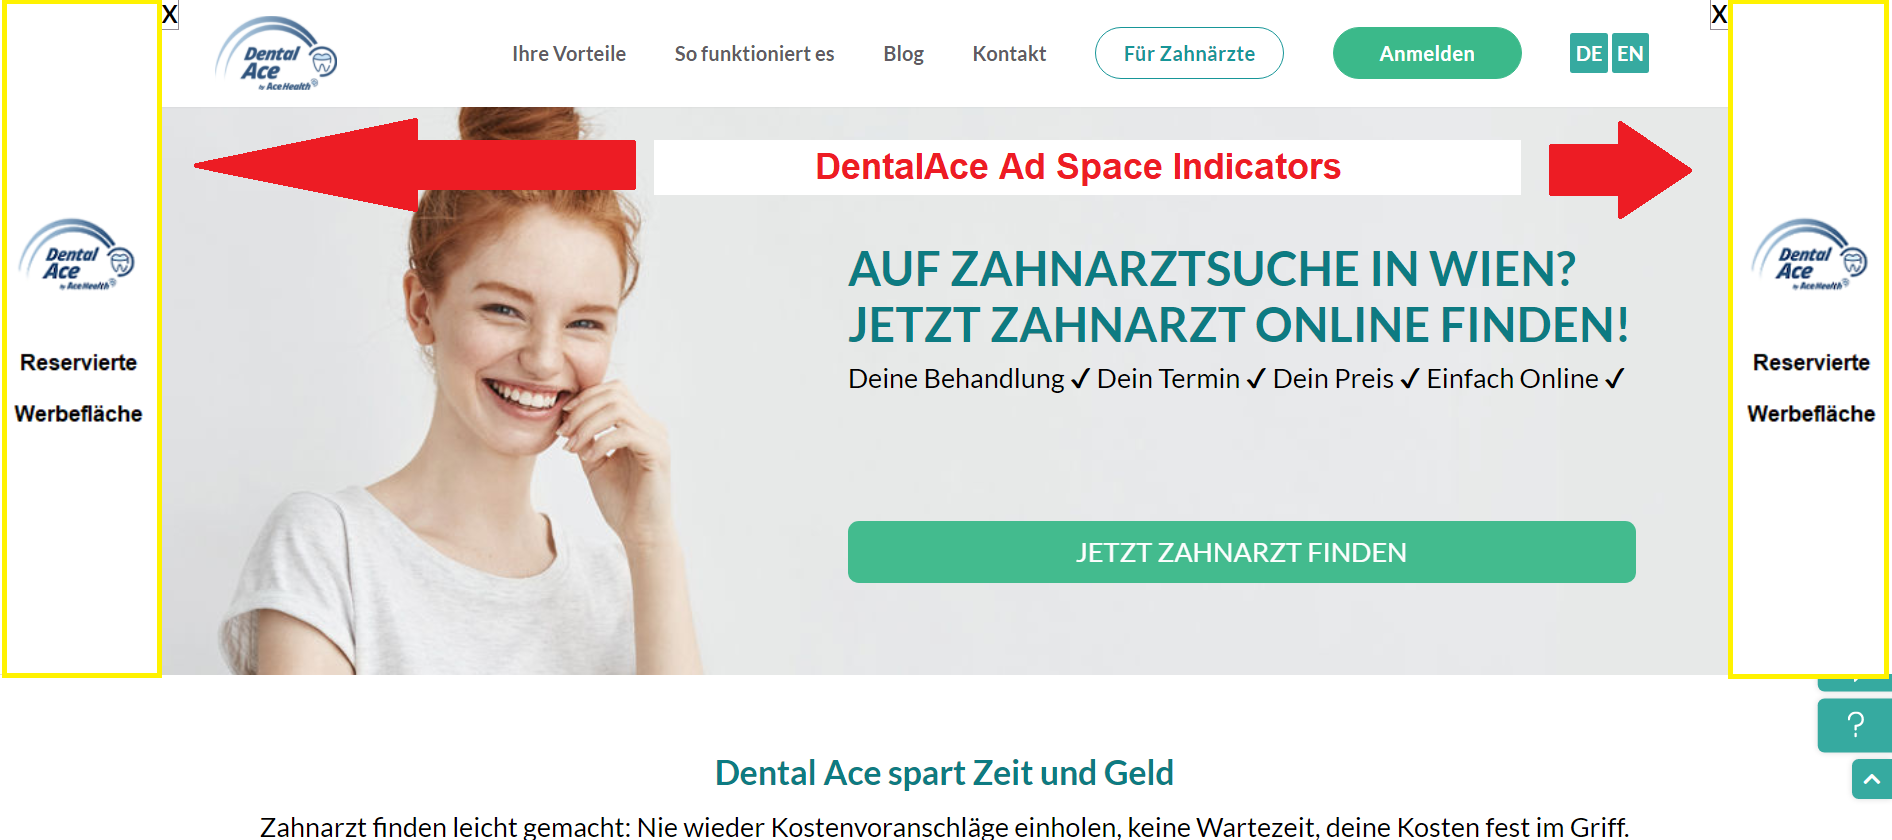 DentalAce ad space placement overview and indicators